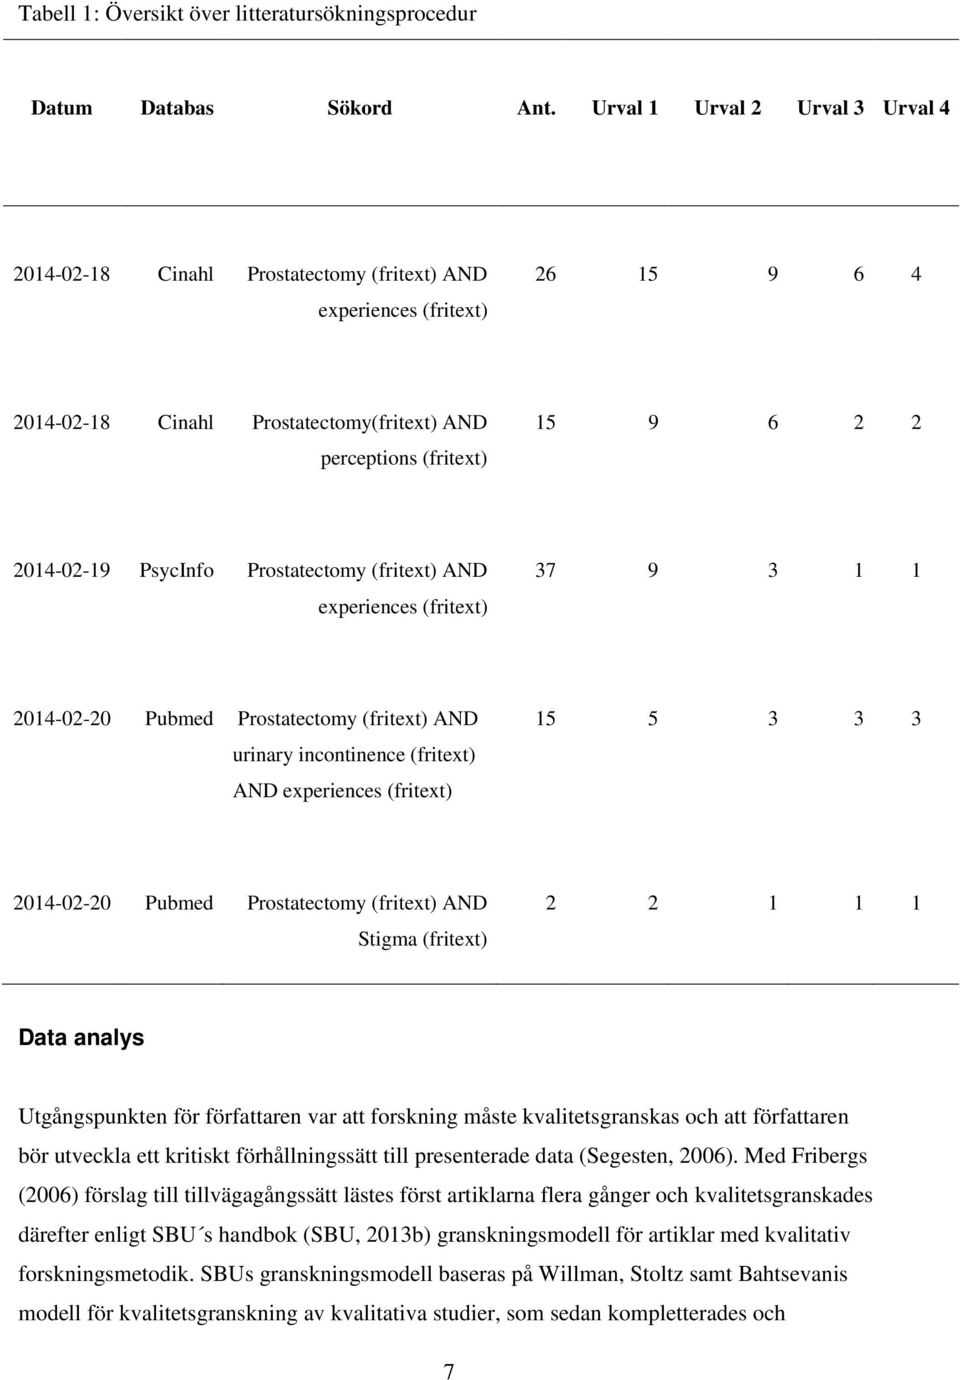 2014-02-19 PsycInfo Prostatectomy (fritext) AND experiences (fritext) 37 9 3 1 1 2014-02-20 Pubmed Prostatectomy (fritext) AND urinary incontinence (fritext) AND experiences (fritext) 15 5 3 3 3